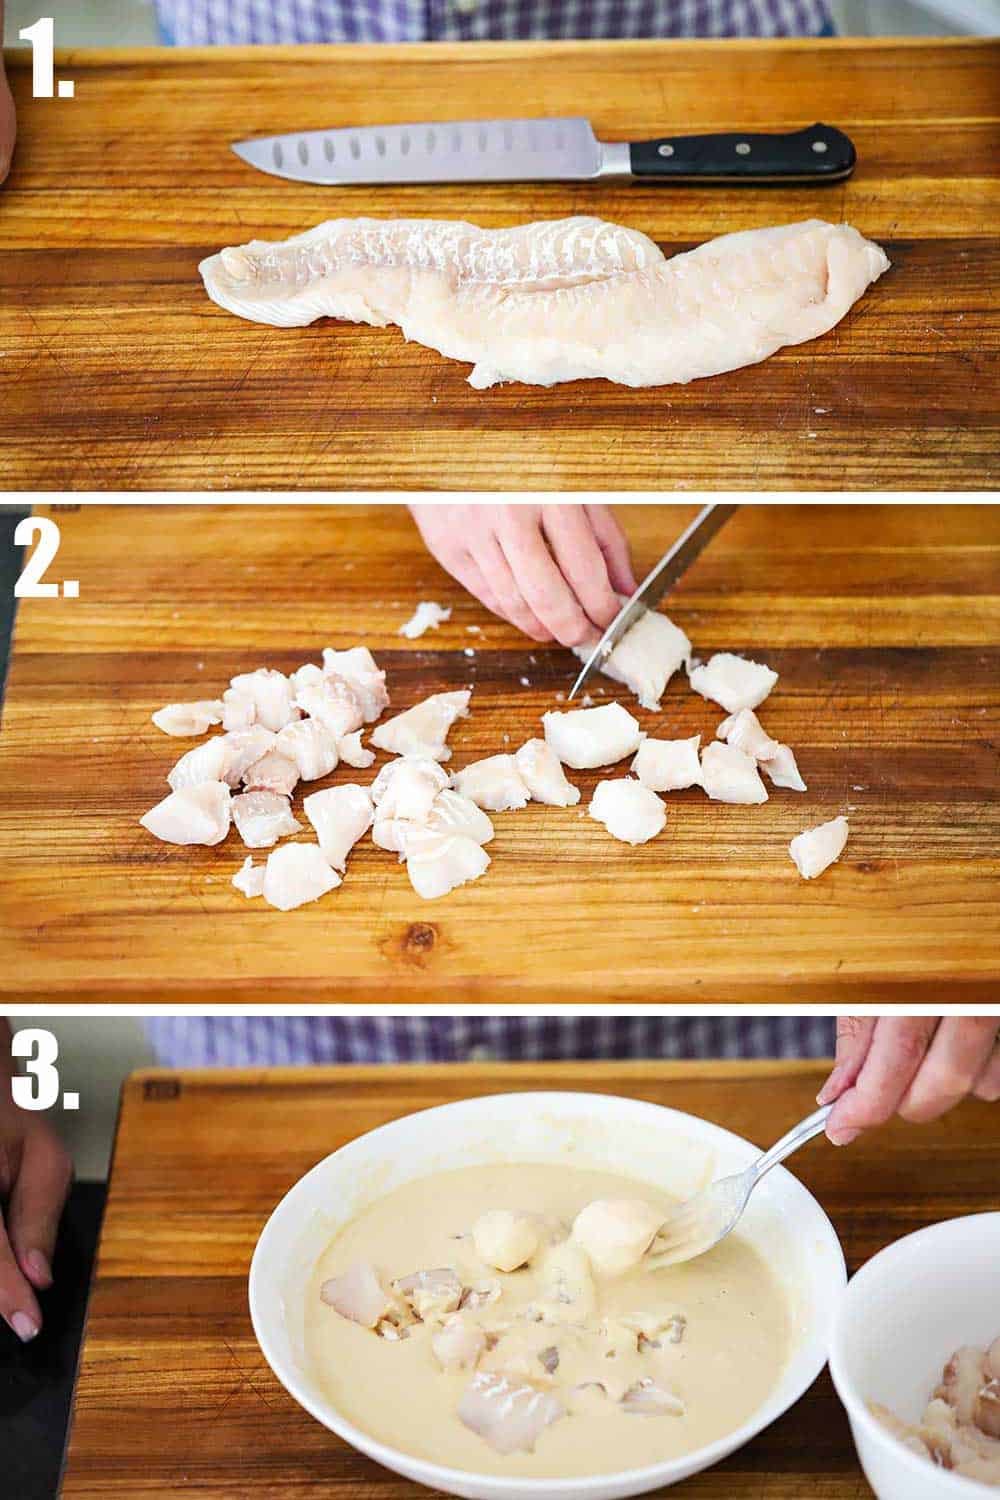 3 stacked images with the top a filet of cod next to a knife, the next a hand cutting the fish, and the bottom the fish in a bowl of batter.